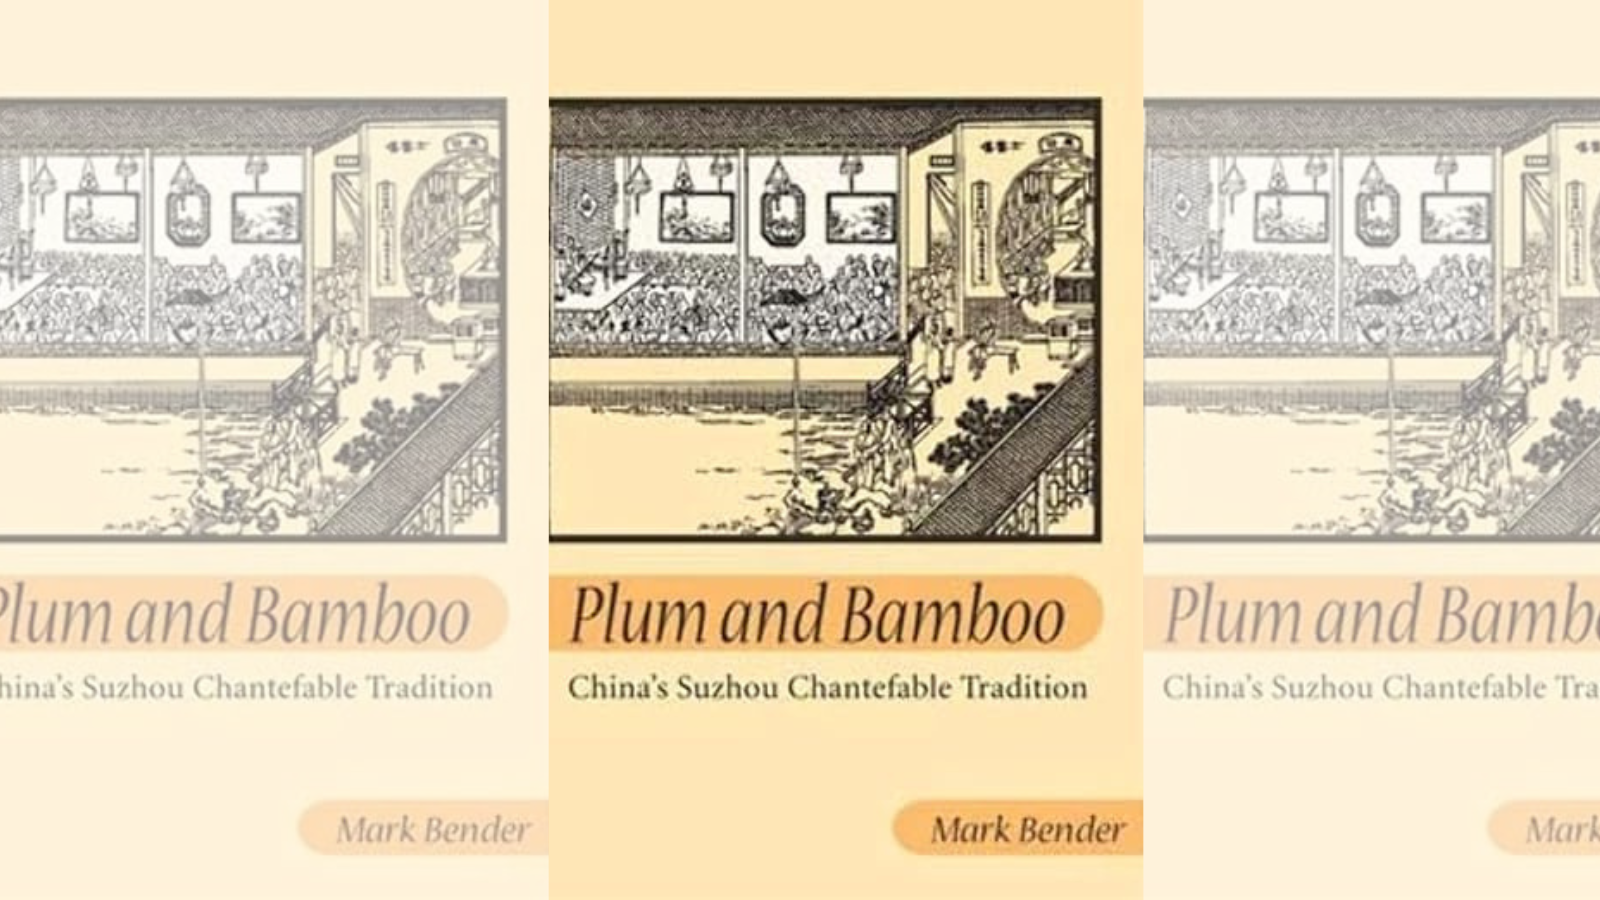 Plum and Bamboo book cover